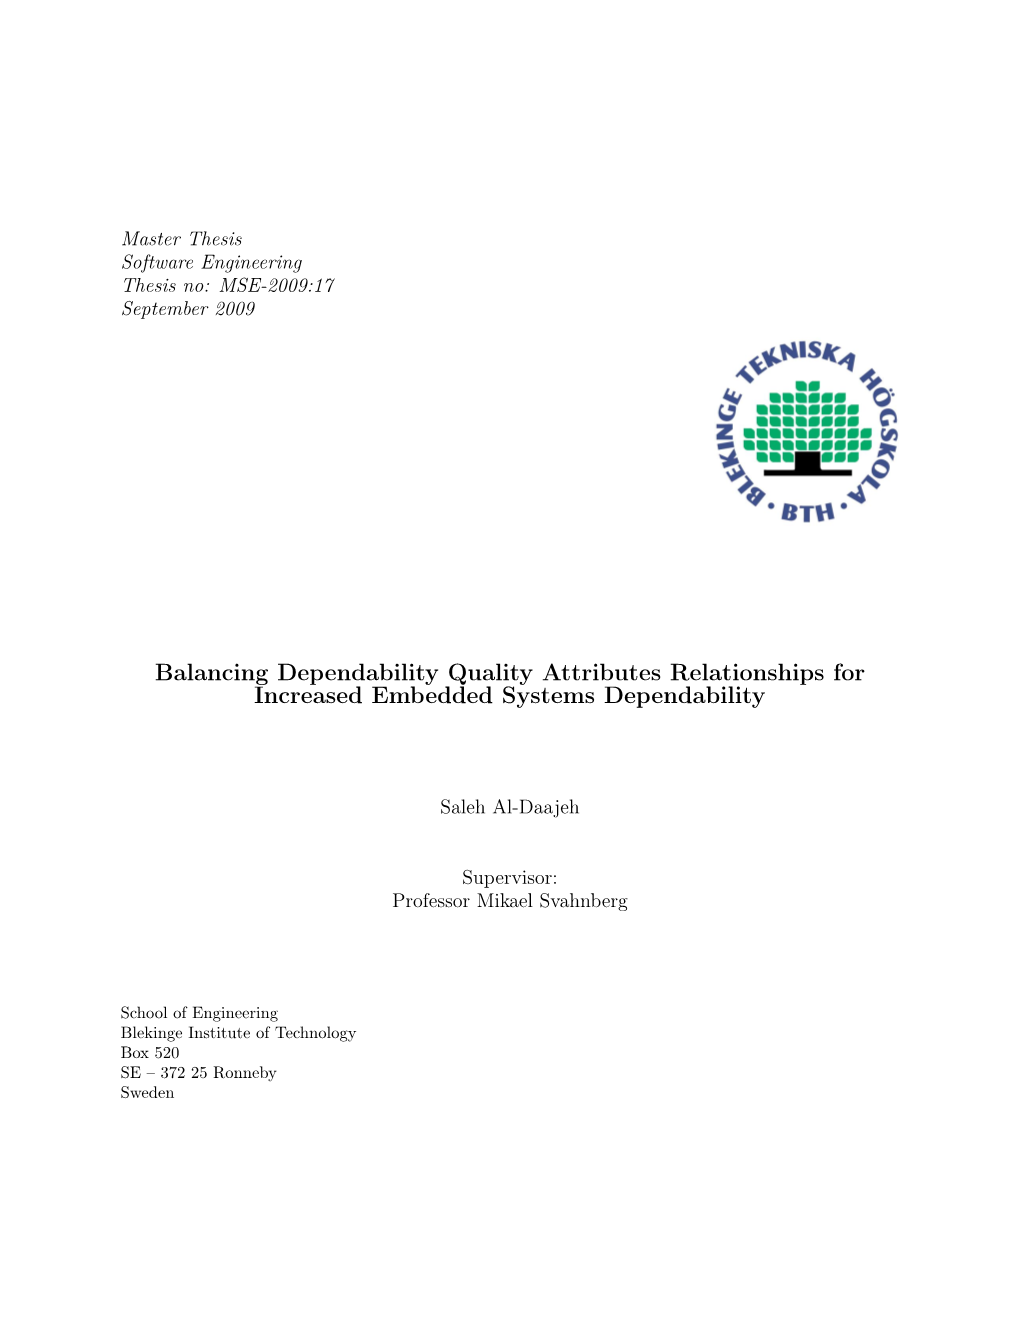 Balancing Dependability Quality Attributes Relationships for Increased Embedded Systems Dependability